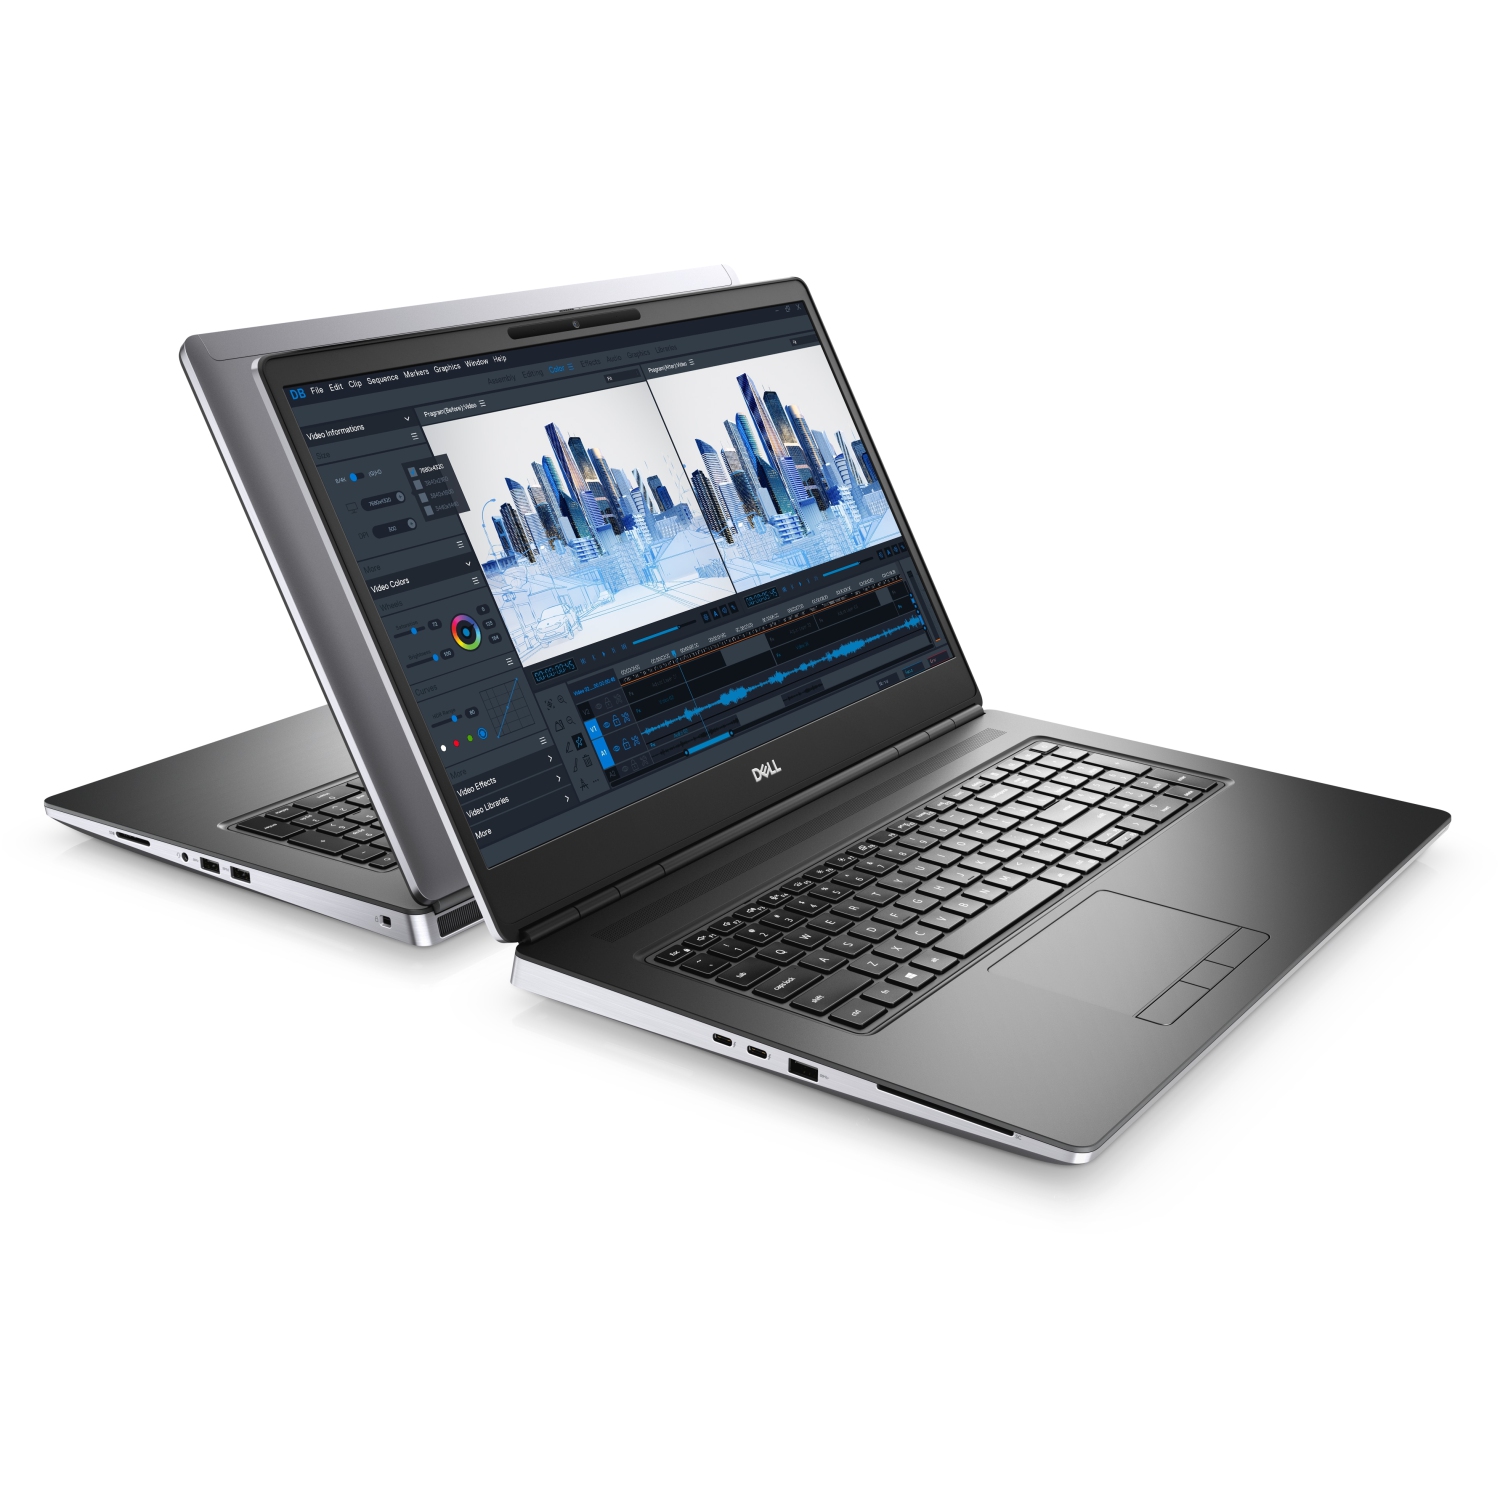 Refurbished (Excellent) - Dell Precision 7000 7760 Workstation Laptop (2021), 17.3" FHD, Core i9, 512GB SSD, 32GB RAM, RTX A4000, 5 GHz, 11th Gen CPU Certified